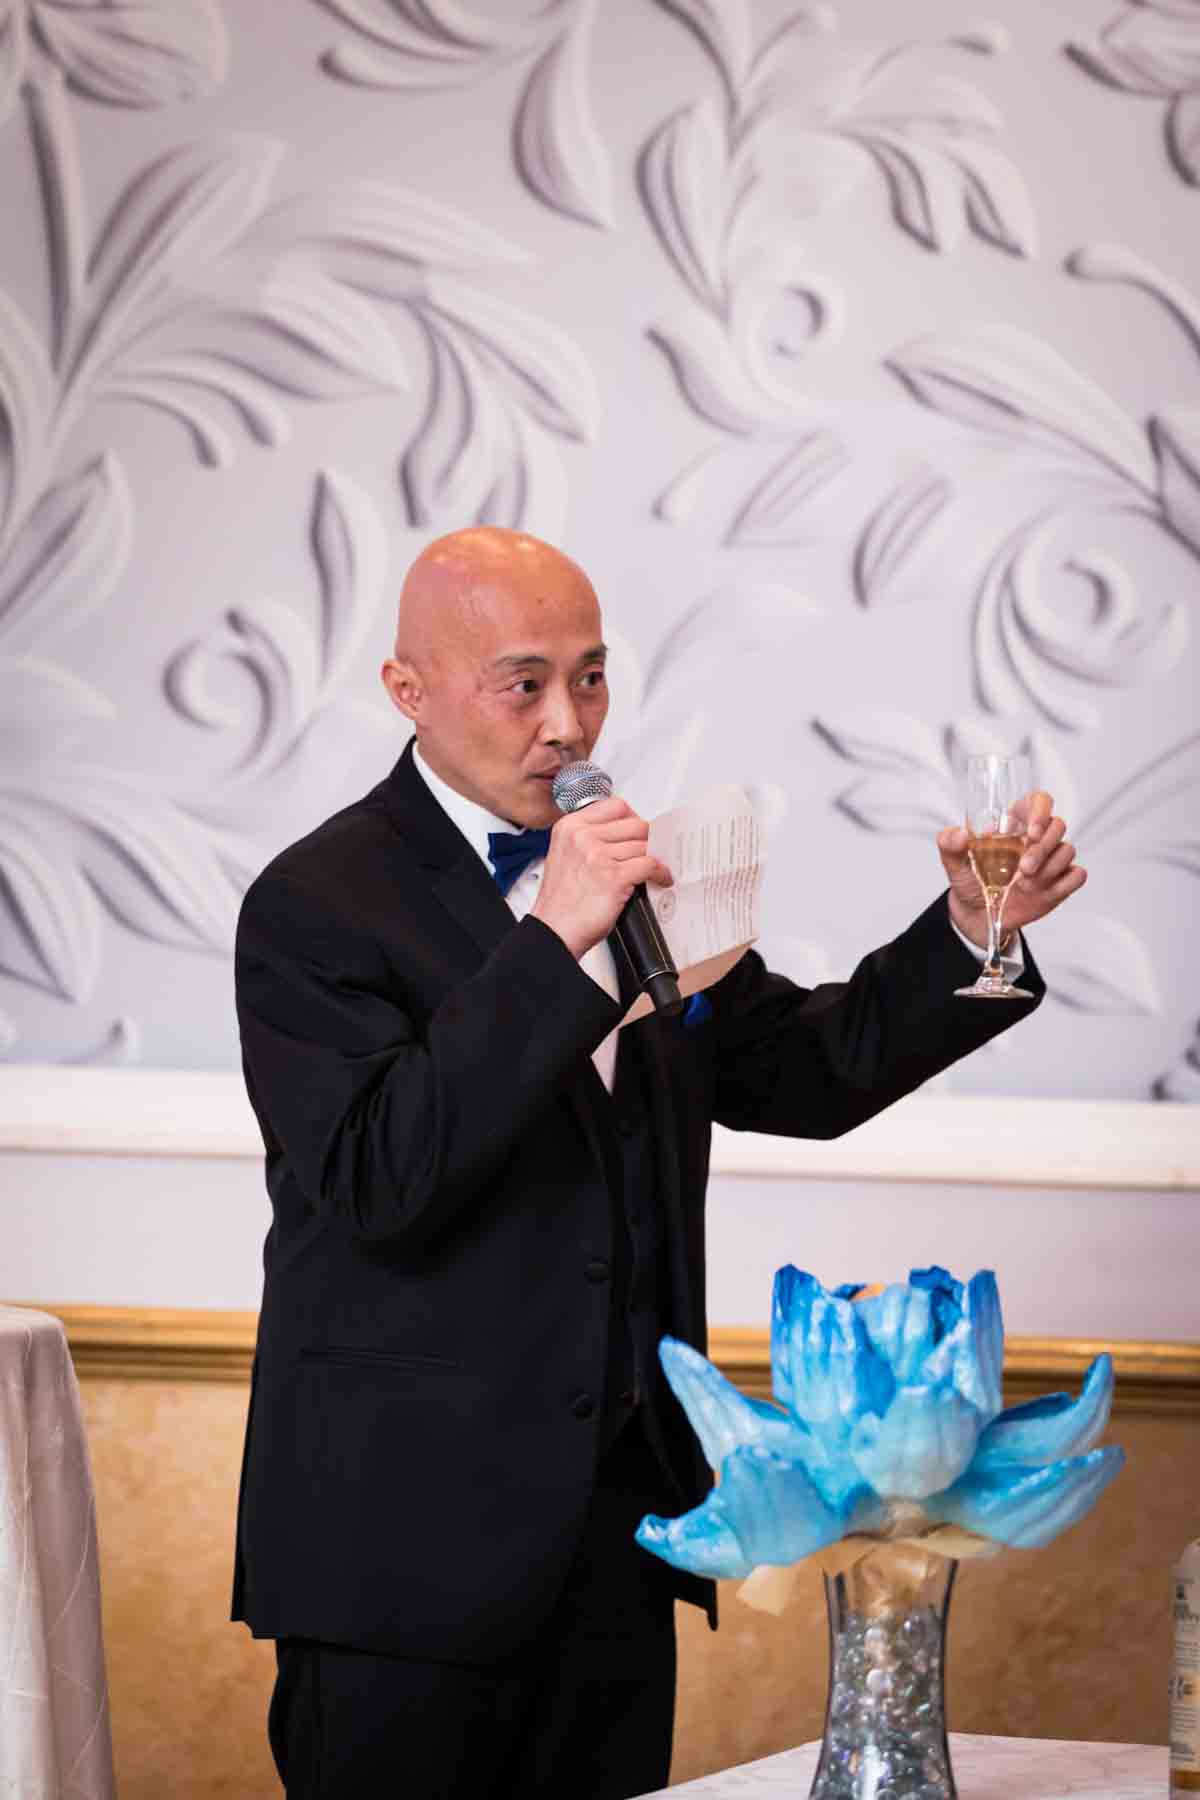 Bald Asian man raising glass of champagne while making speech at a Terrace on the Park wedding